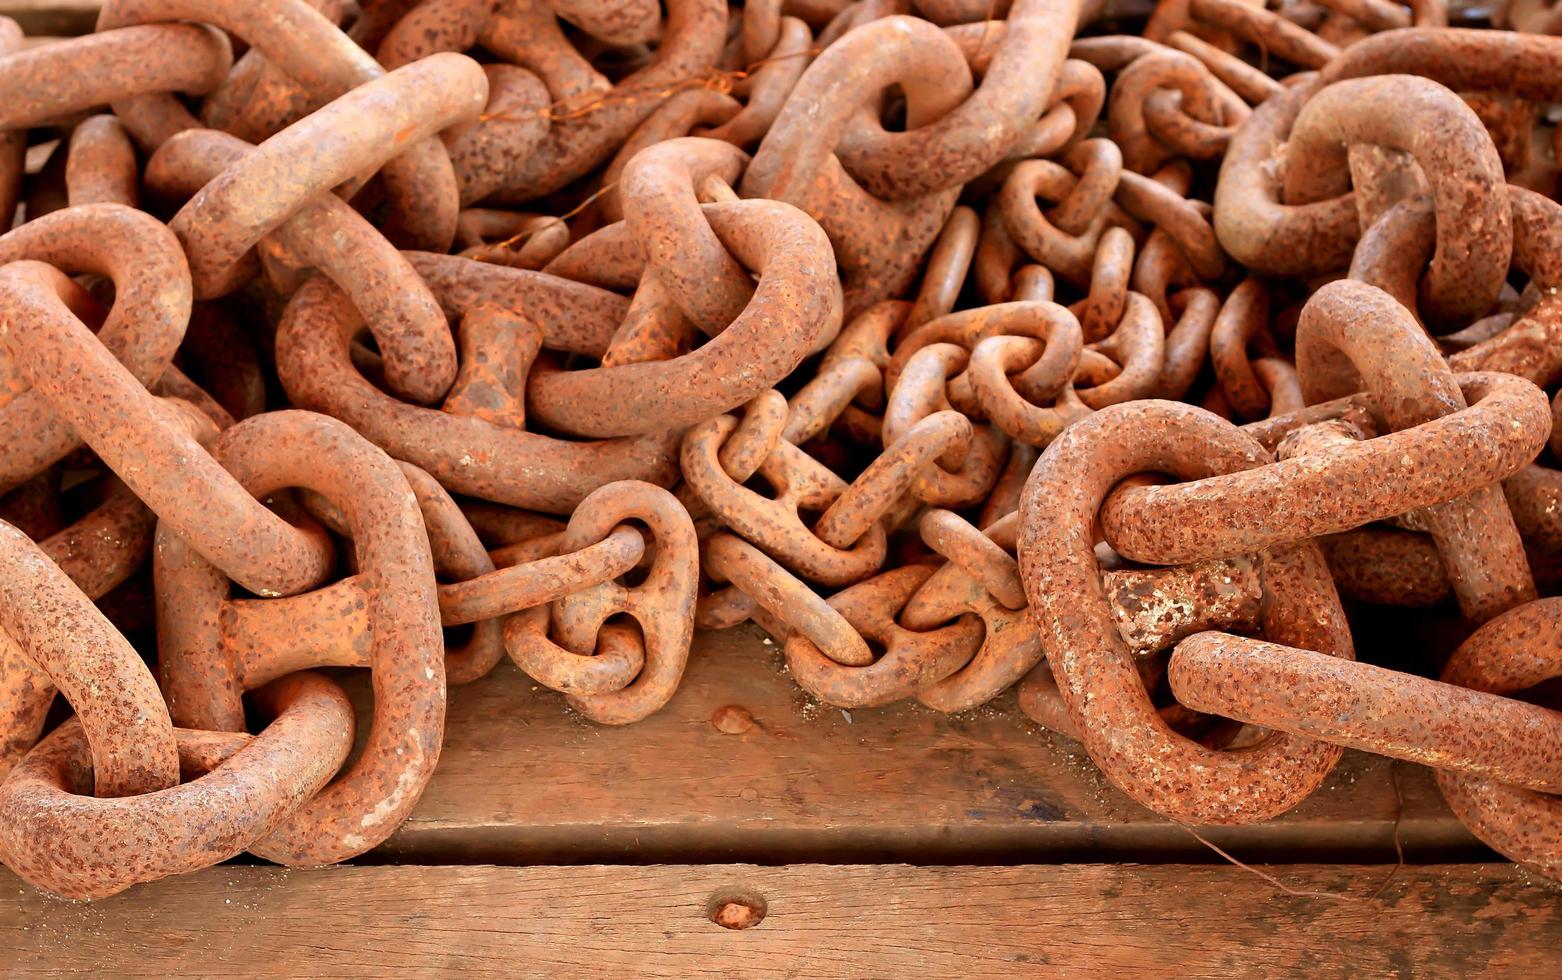 Old rusty chain on wooden background photo